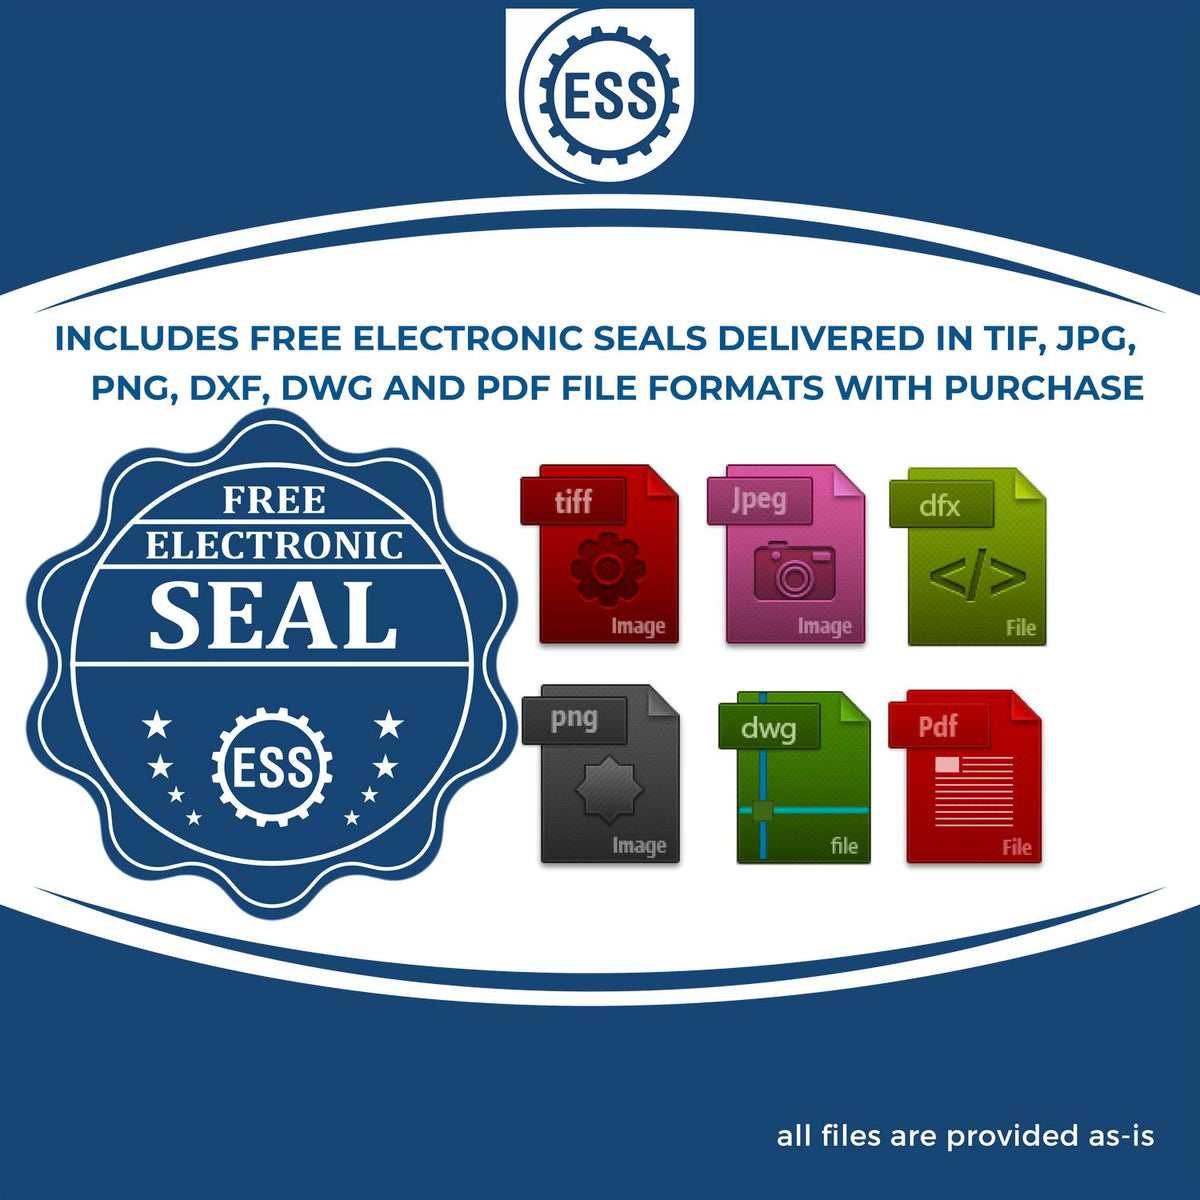 An infographic for the free electronic seal for the Handheld Nebraska Land Surveyor Seal illustrating the different file type icons such as DXF, DWG, TIF, JPG and PNG.